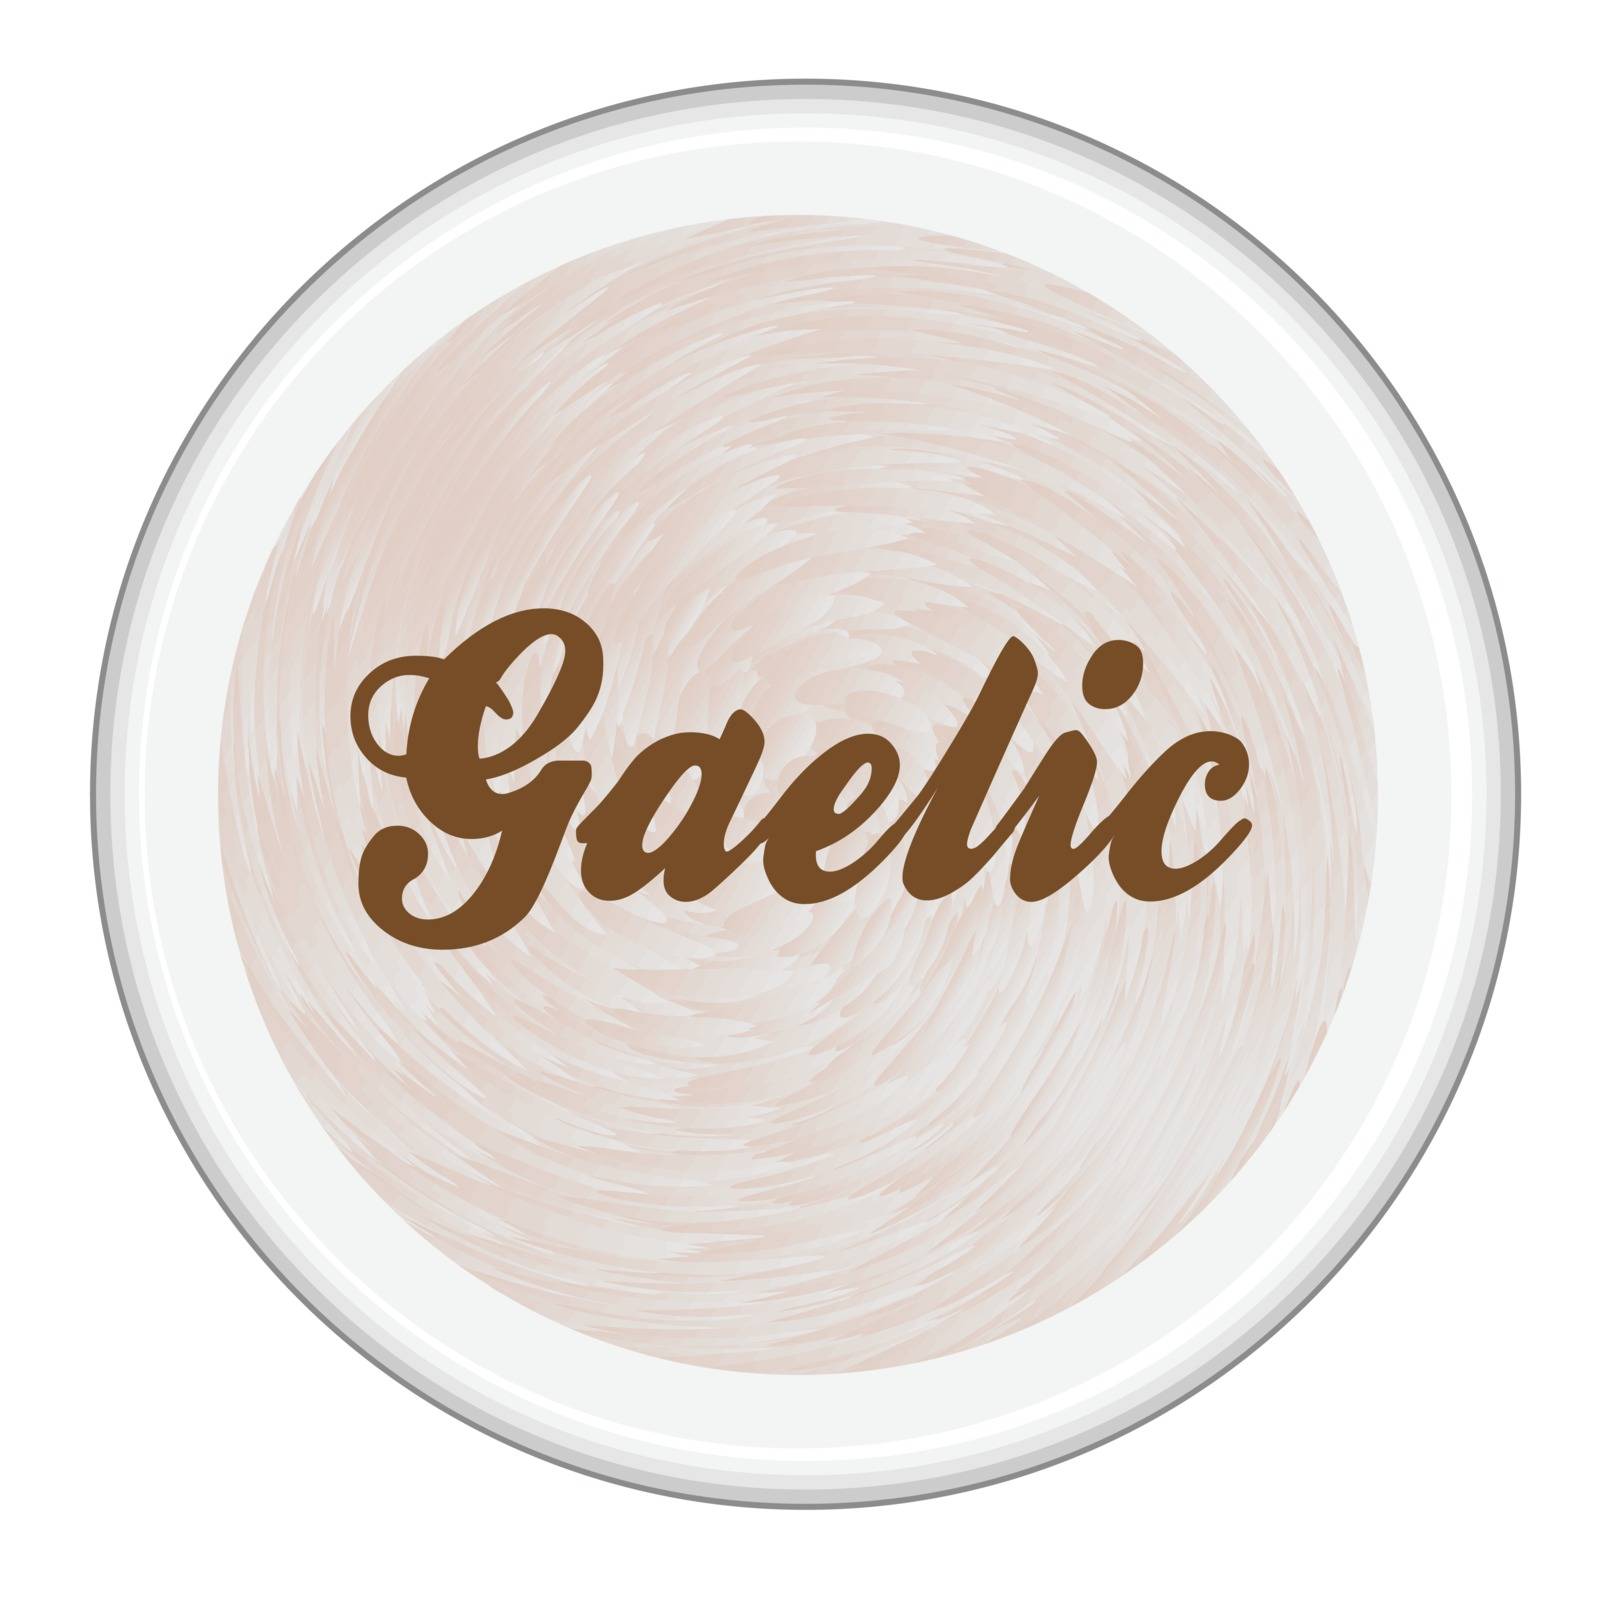 Top view of a cup of Gaelic Irish Coffee over a white background